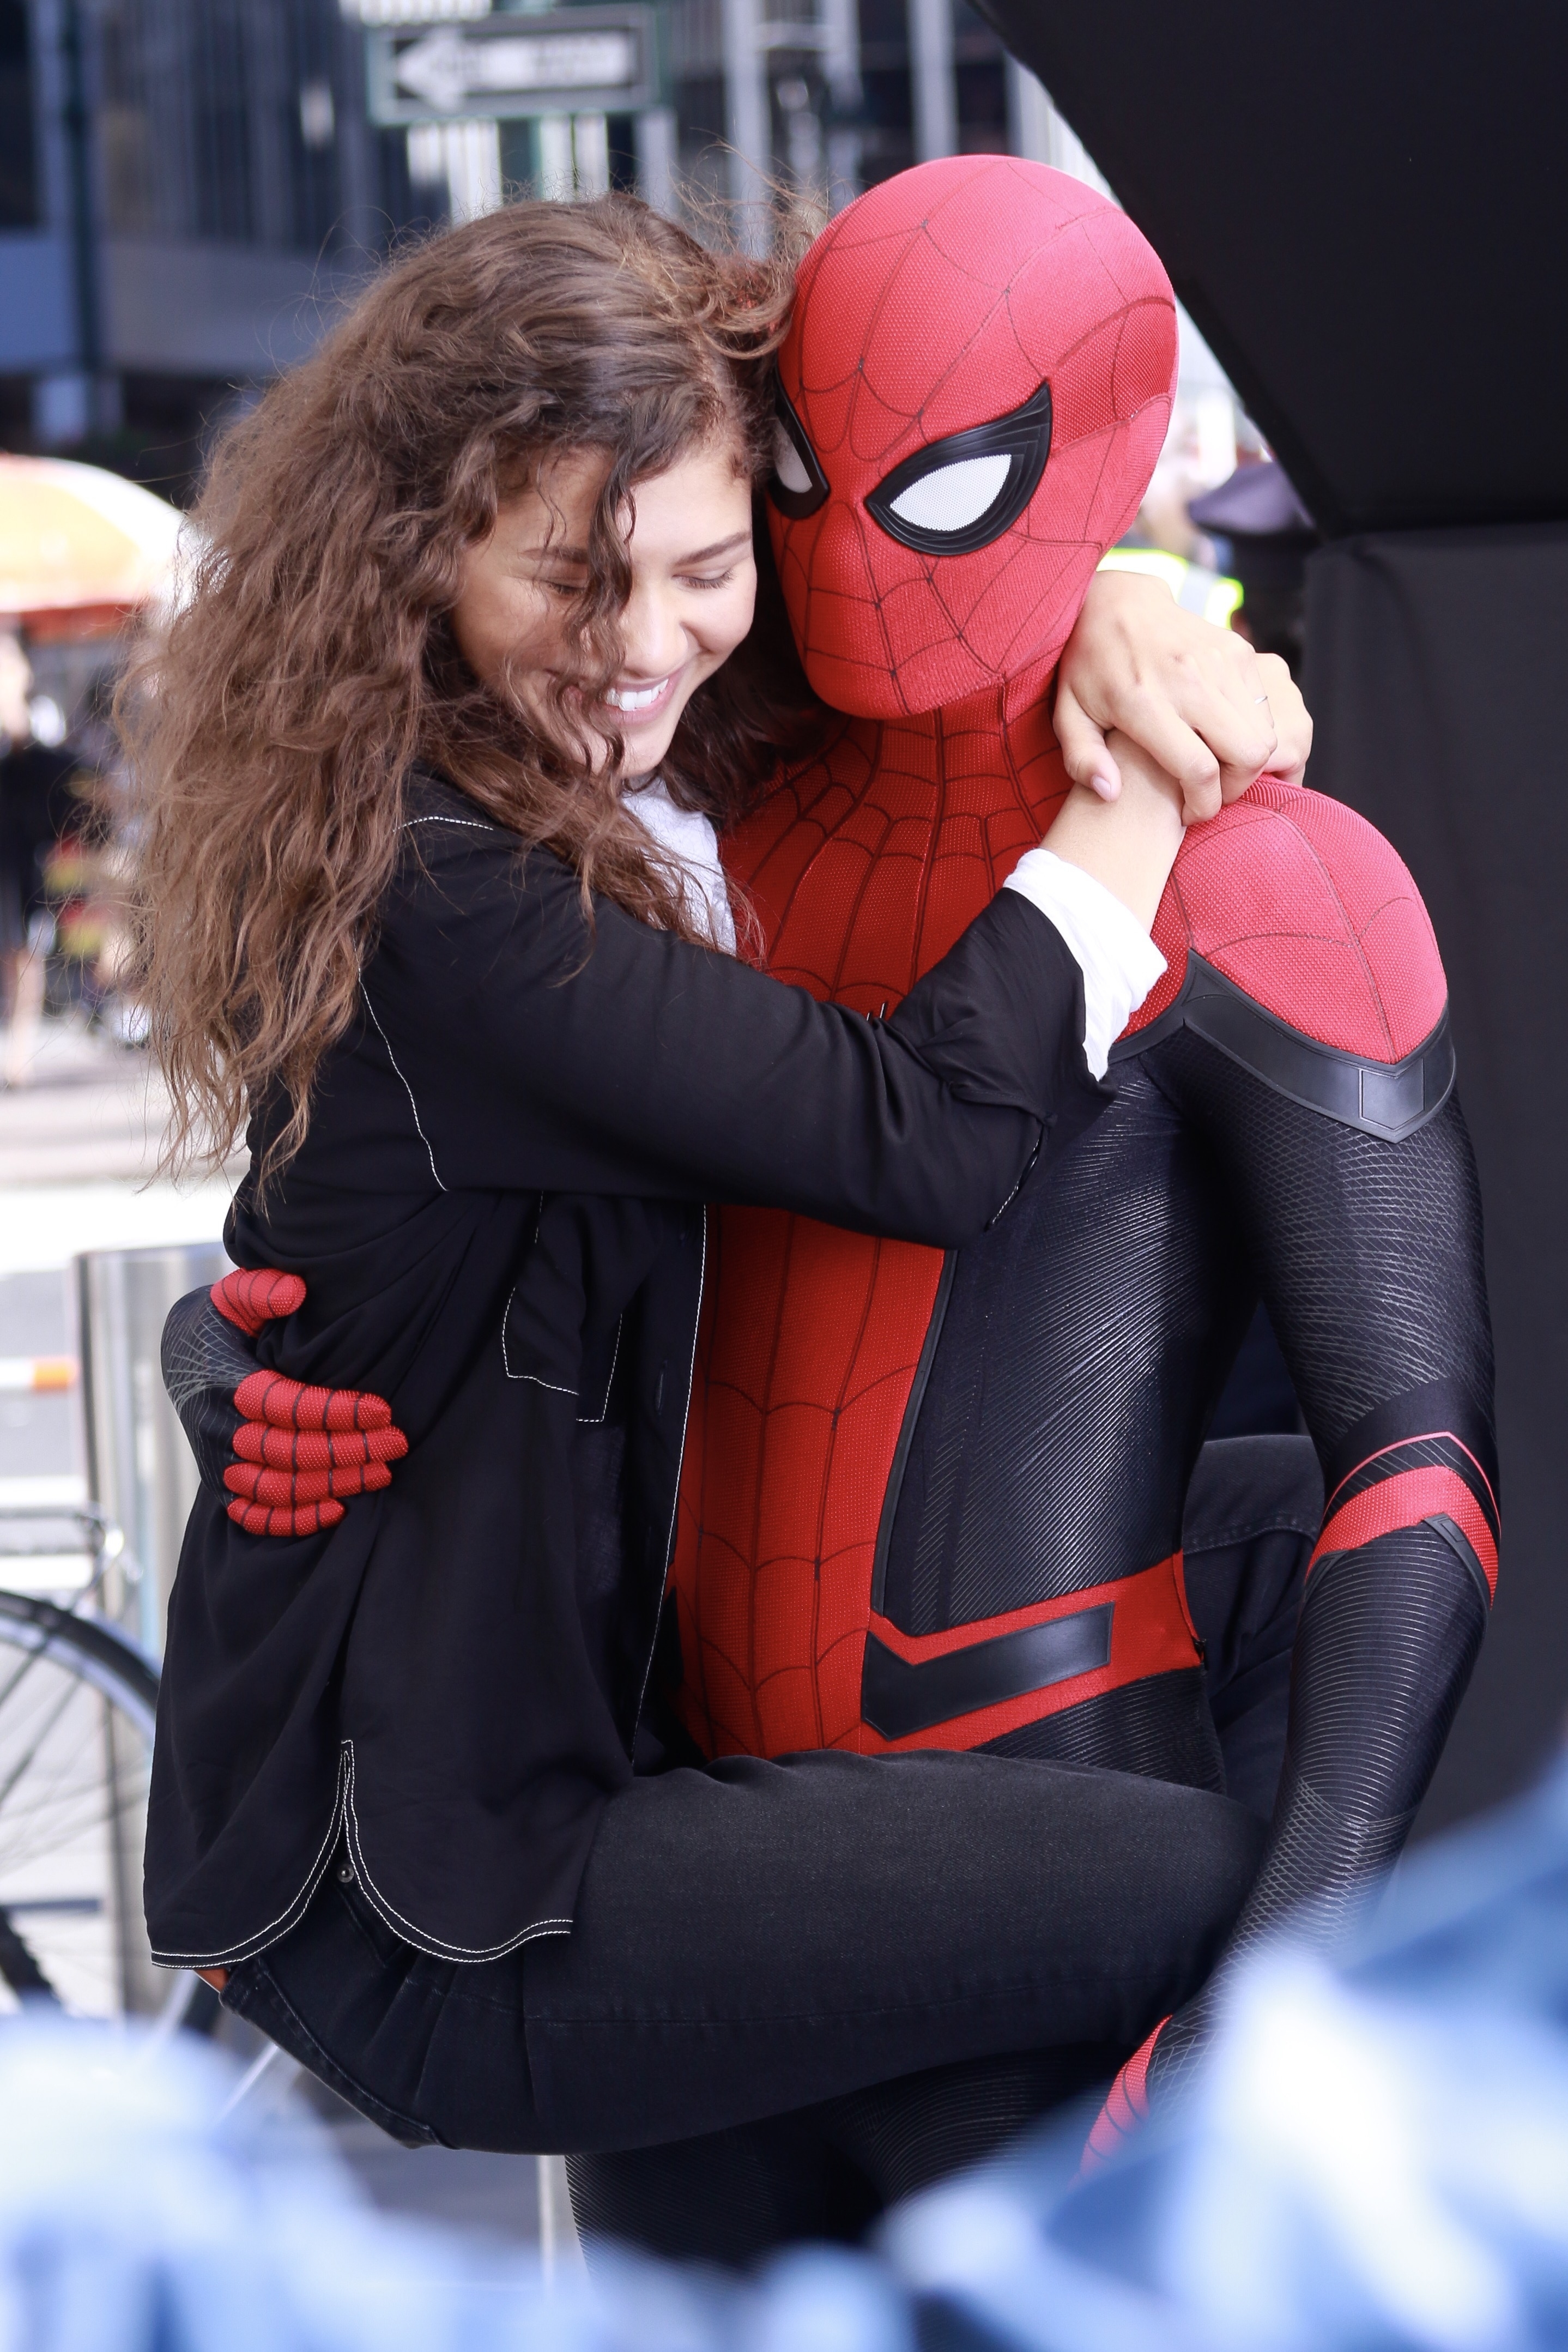 Zendaya smiling and hugging Tom in a Spider-Man costume